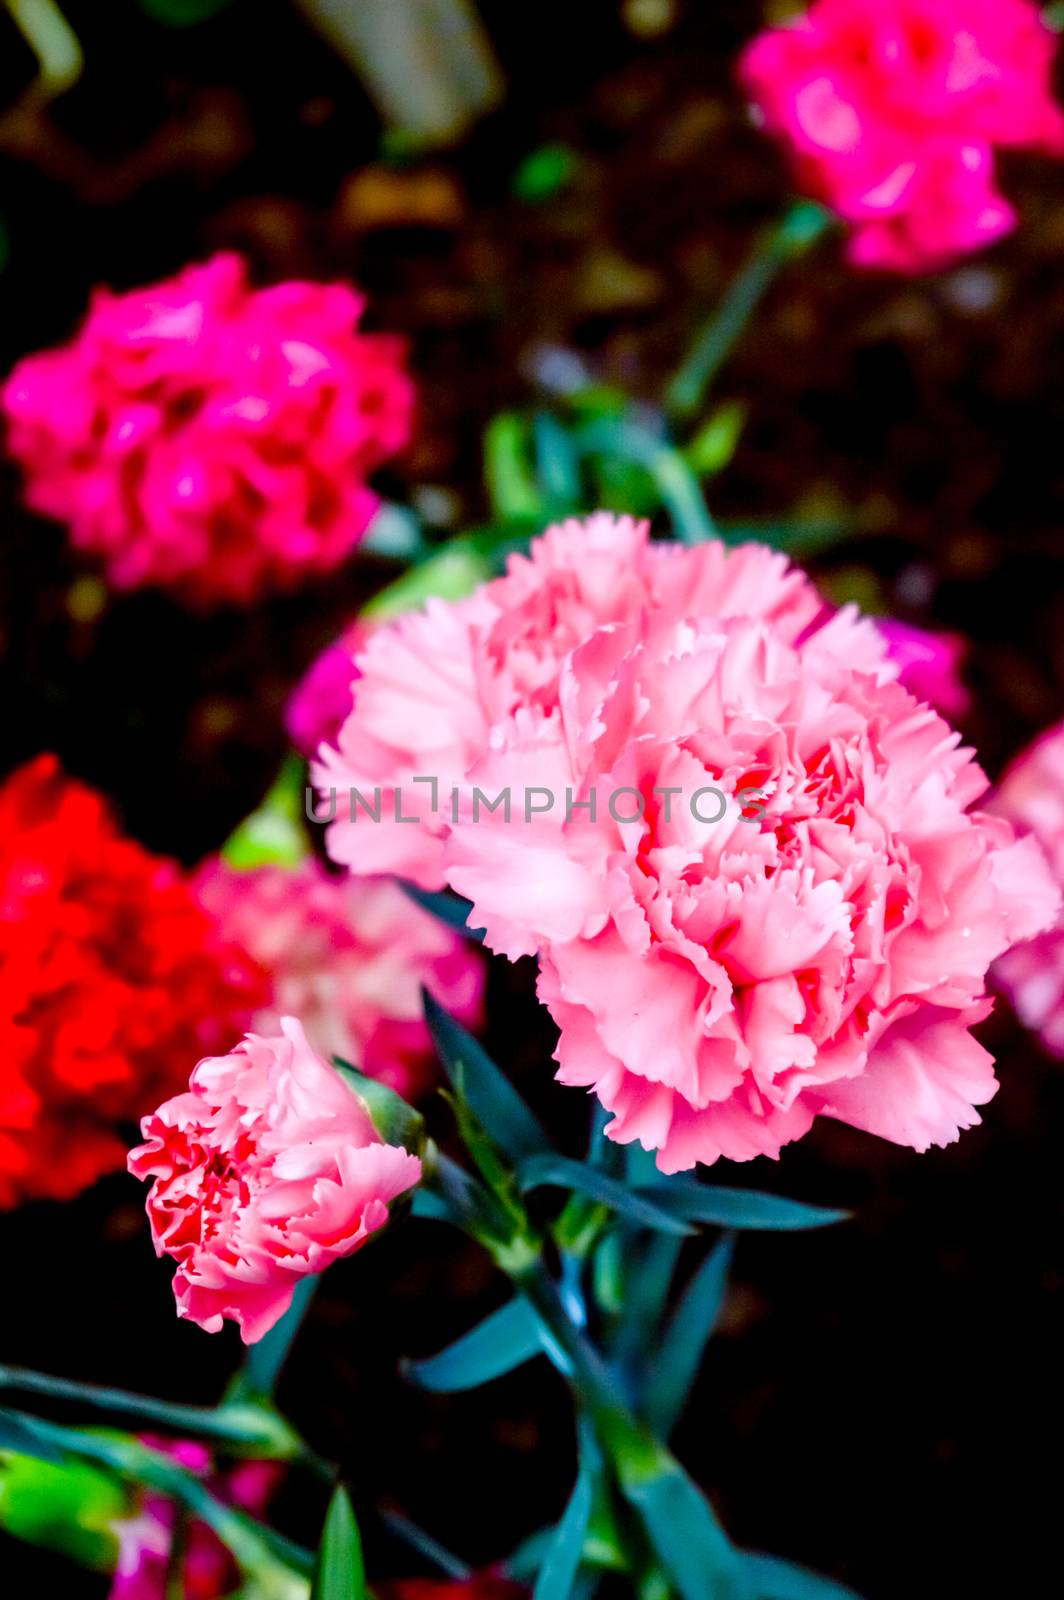 Dianthus caryophyllus, the carnation or clove pink is a species of Dianthus. It is an herbaceous perennial plant. The carnation is national flower of Spain, Monaco, and Slovenia. by sudiptabhowmick